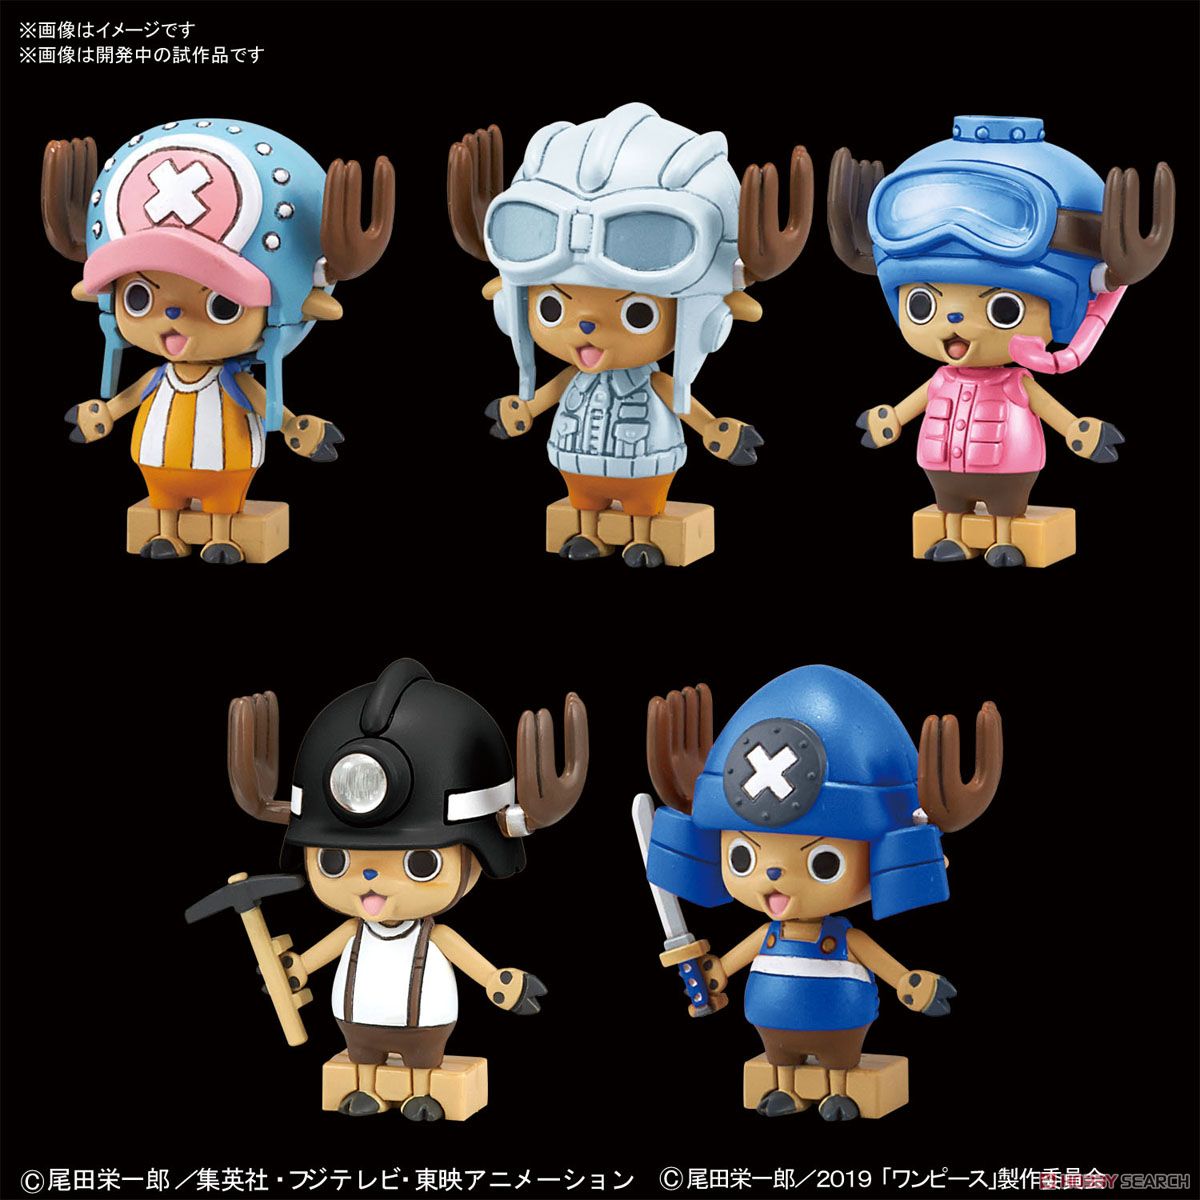 [ONE PIECE] Chopper Robo TV Animation 20th Anniversary One Piece Stampede Color Ver. Set (